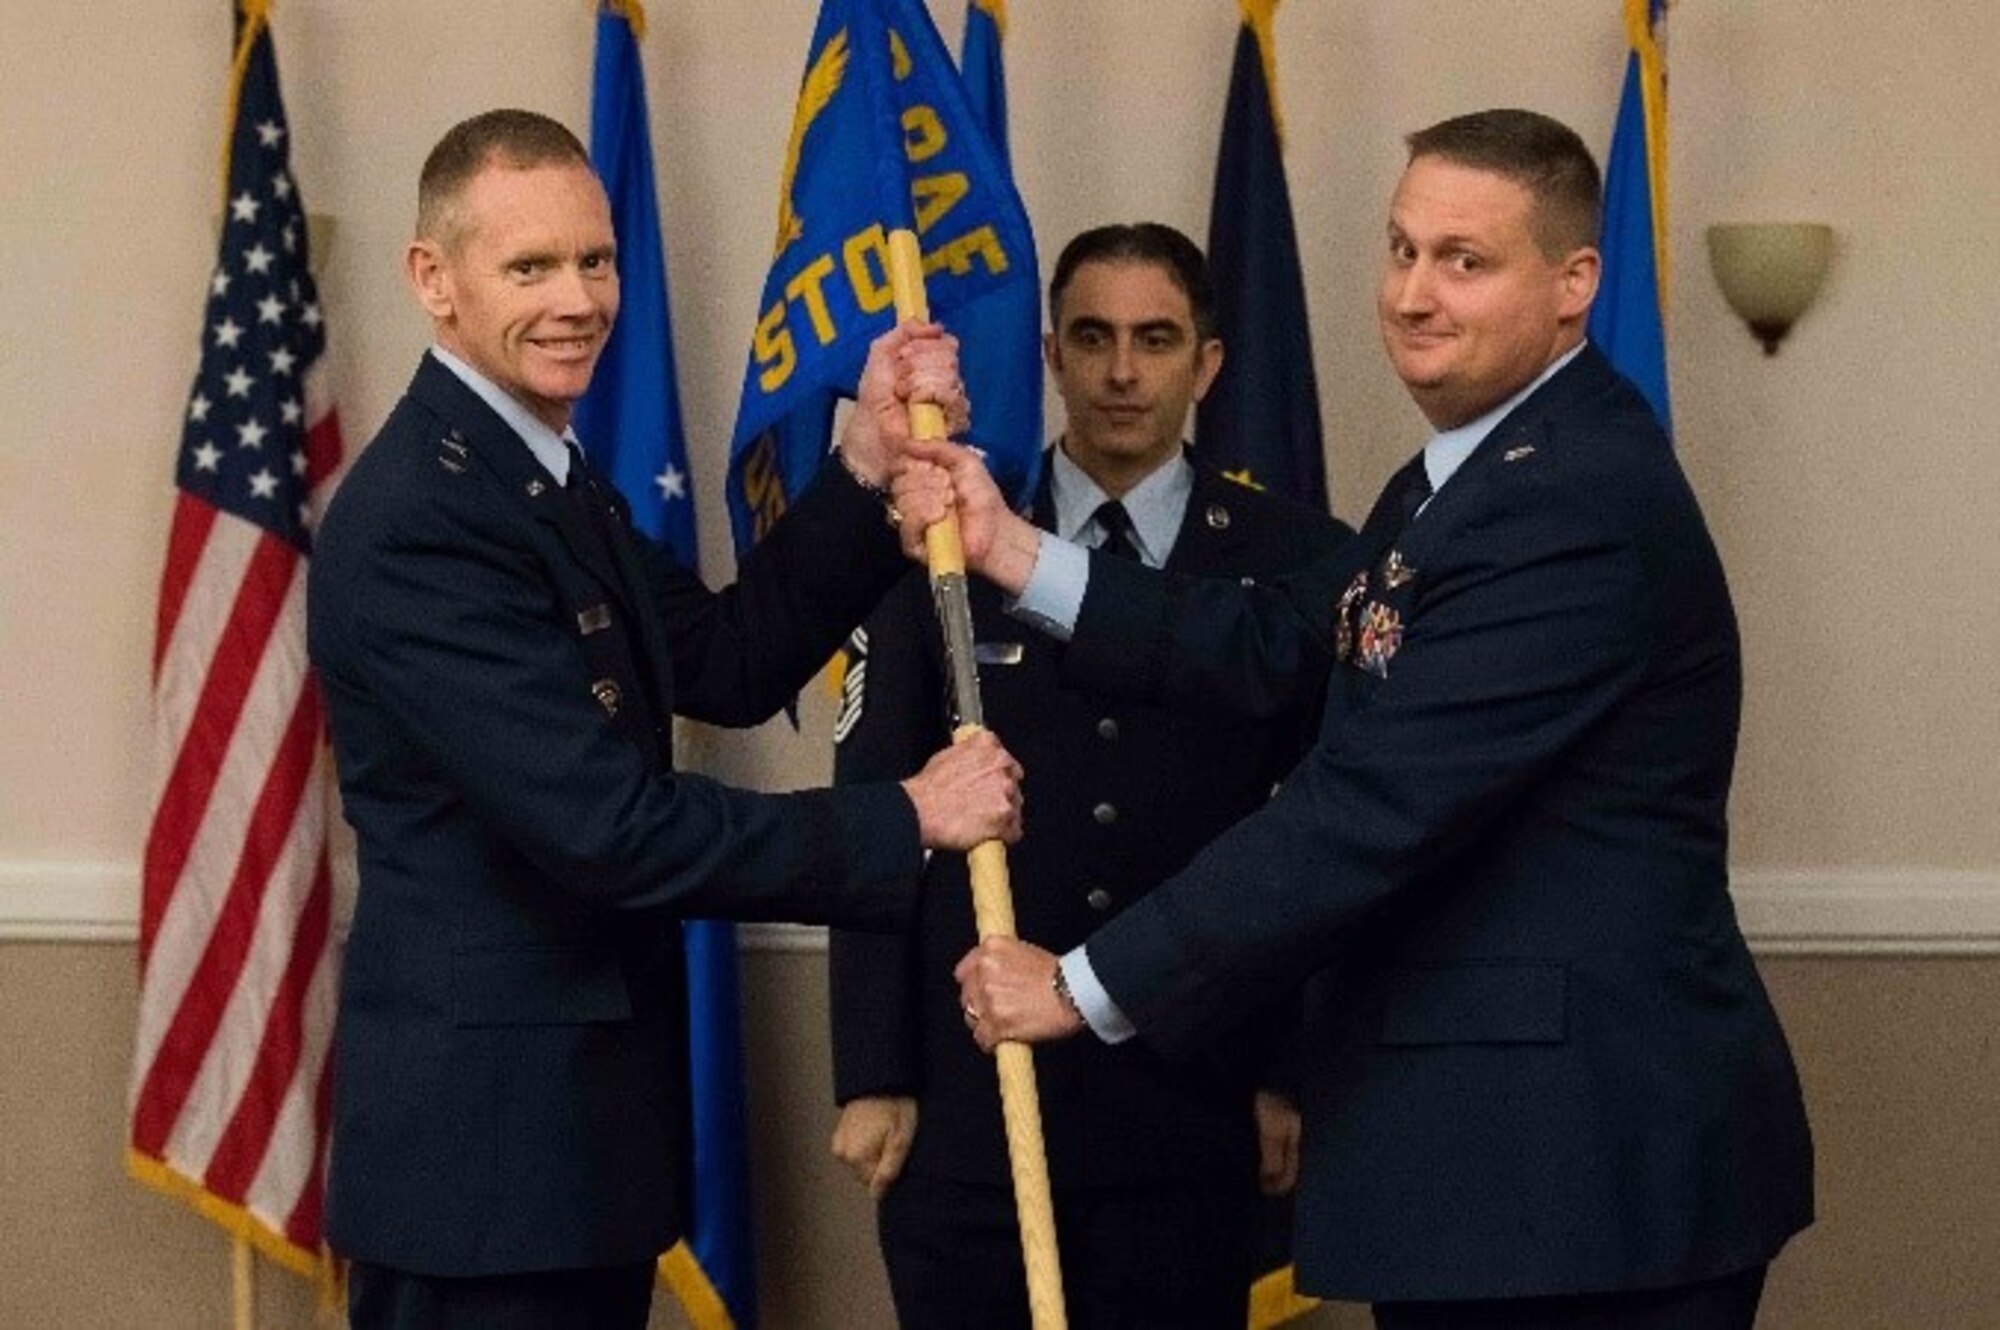 U.S. Air Force Lt. Col. David H. Donatelli II, outgoing 608th Strategic Operations Squadron commander, relinquishes command to Maj. Gen. James Dawkins Jr., 8th Air Force and J-GSOC commander, during a deactivation ceremony at Barksdale Air Force Base, La., Oct. 15, 2018. The 608th STOS has supported joint operations since June 4, 2004. (U.S. Air Force photo by Airman 1st Class Tessa Corrick)